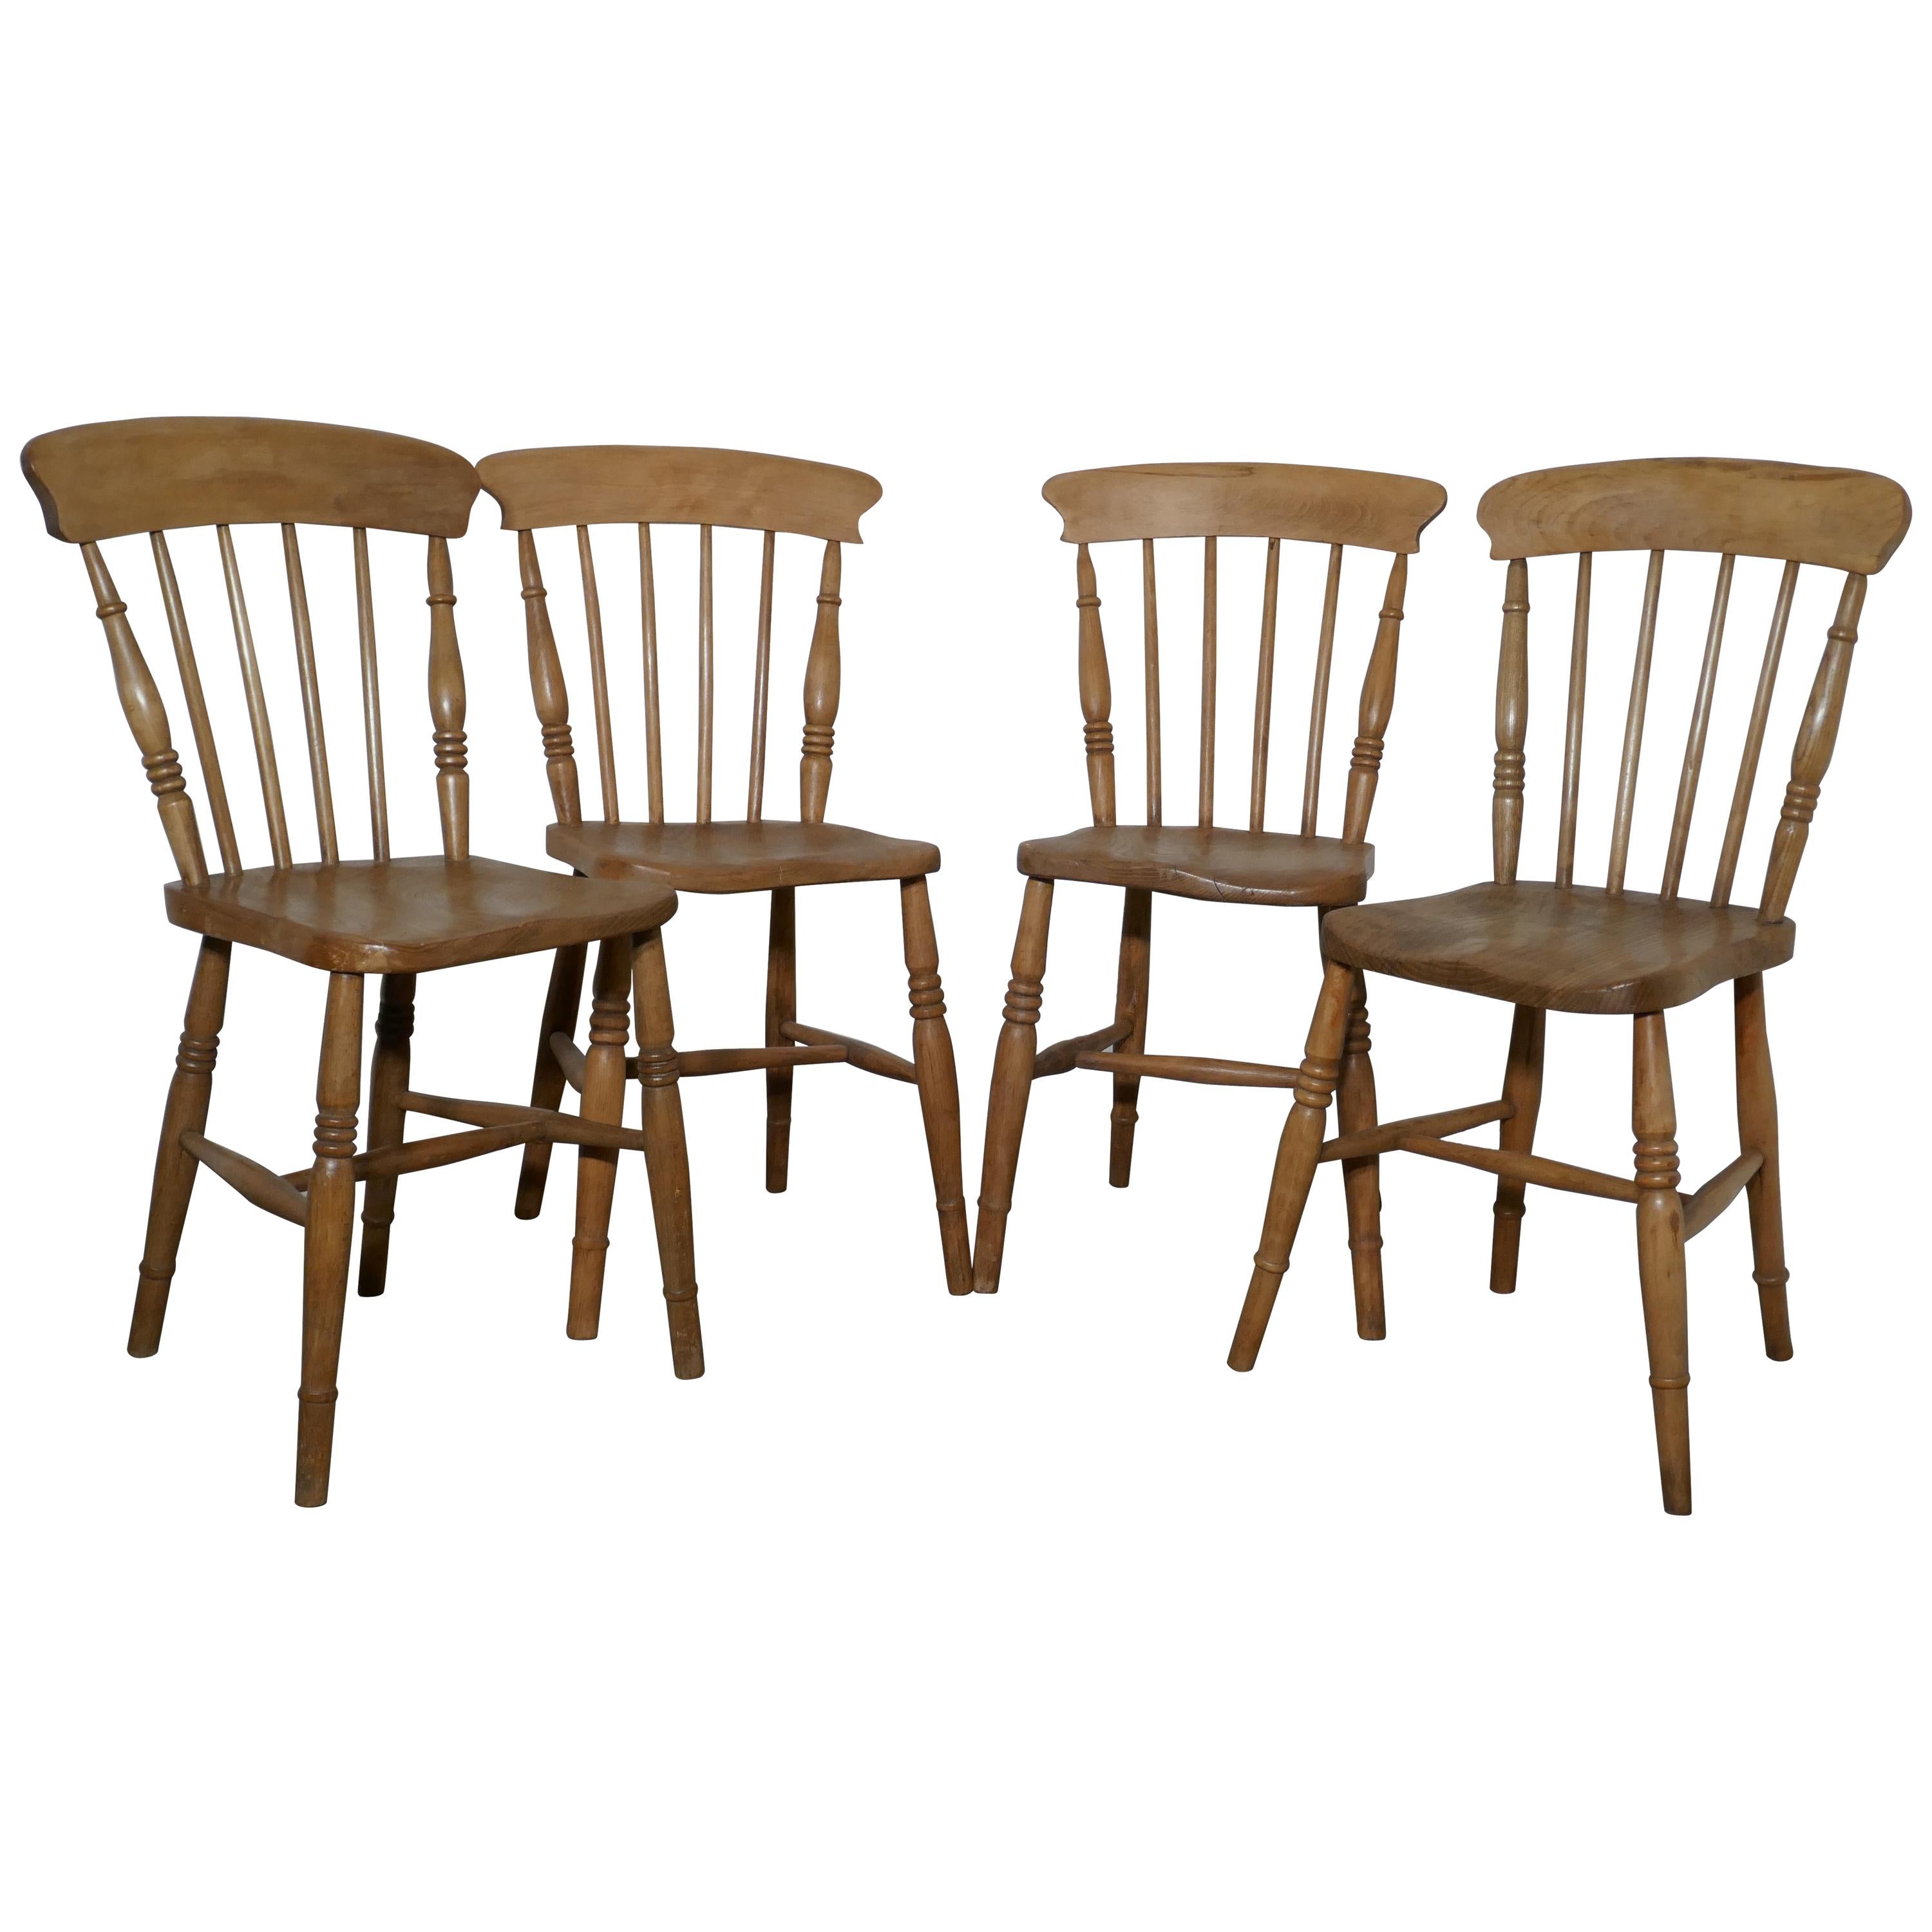 Harlequin Set of 4 Victorian Beech & Elm Country Kitchen Chairs